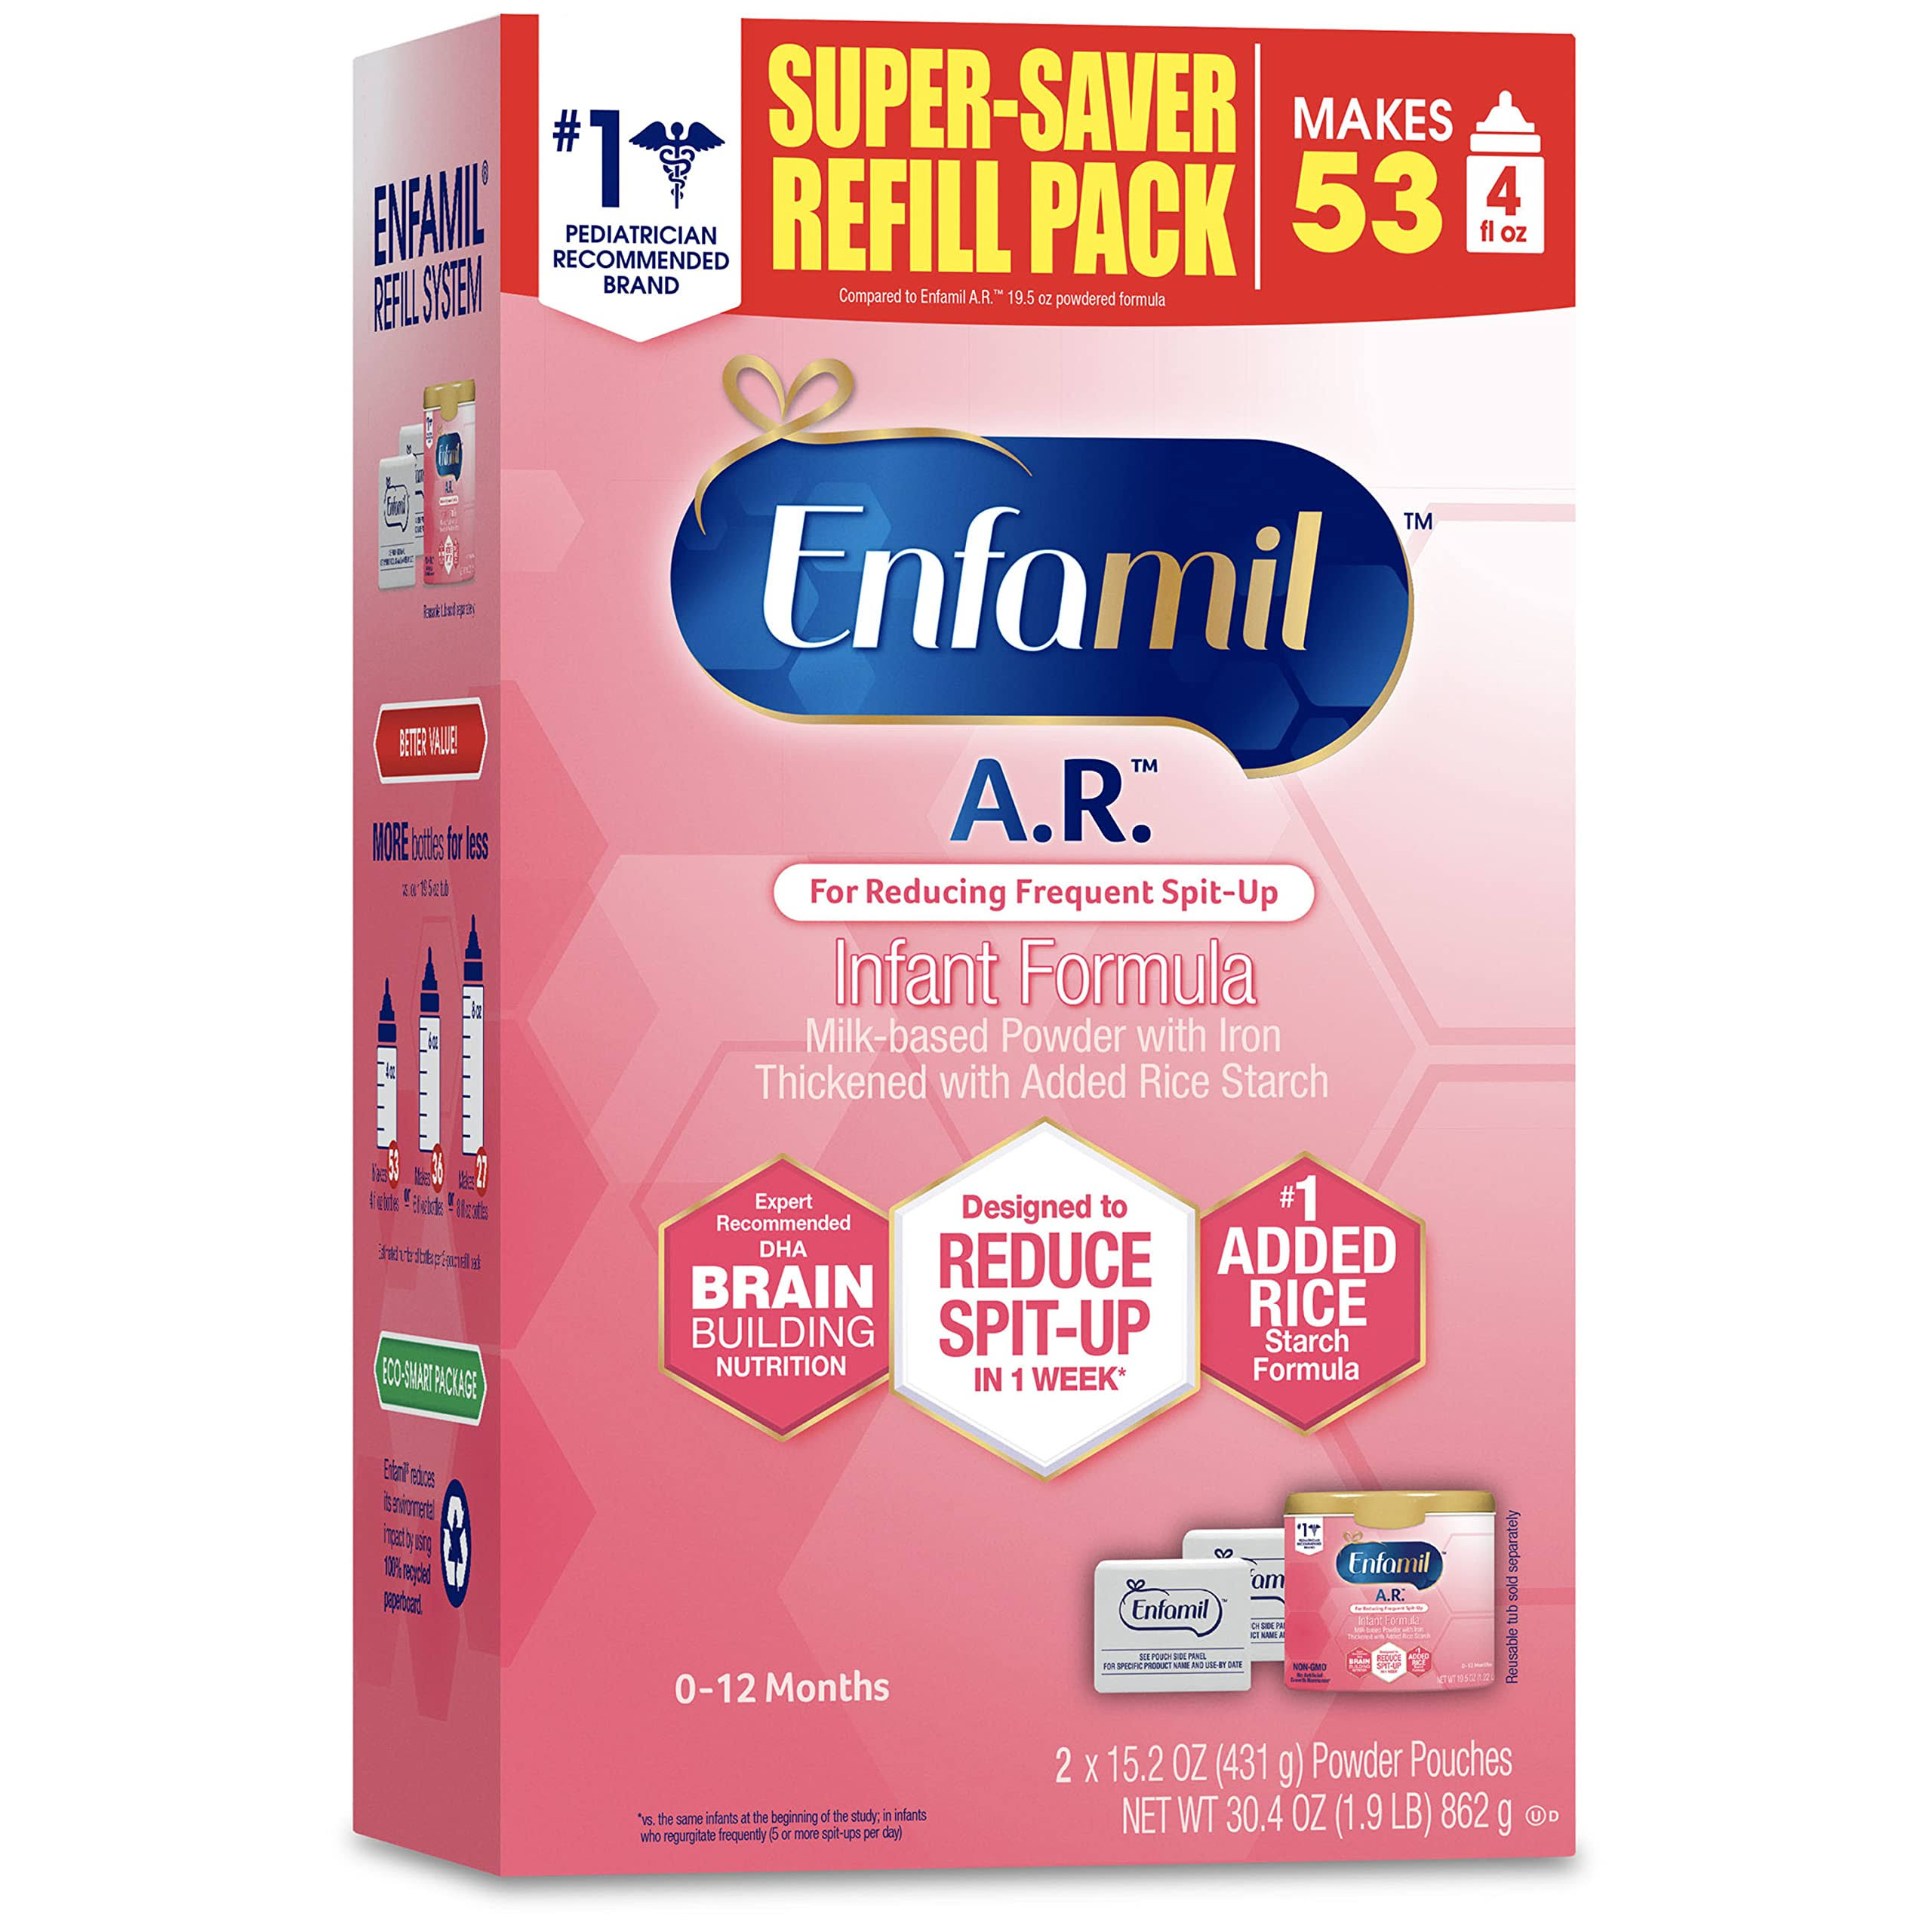 Enfamil A.R. Infant Formula - Clinically Proven to Reduce Spit-Up in